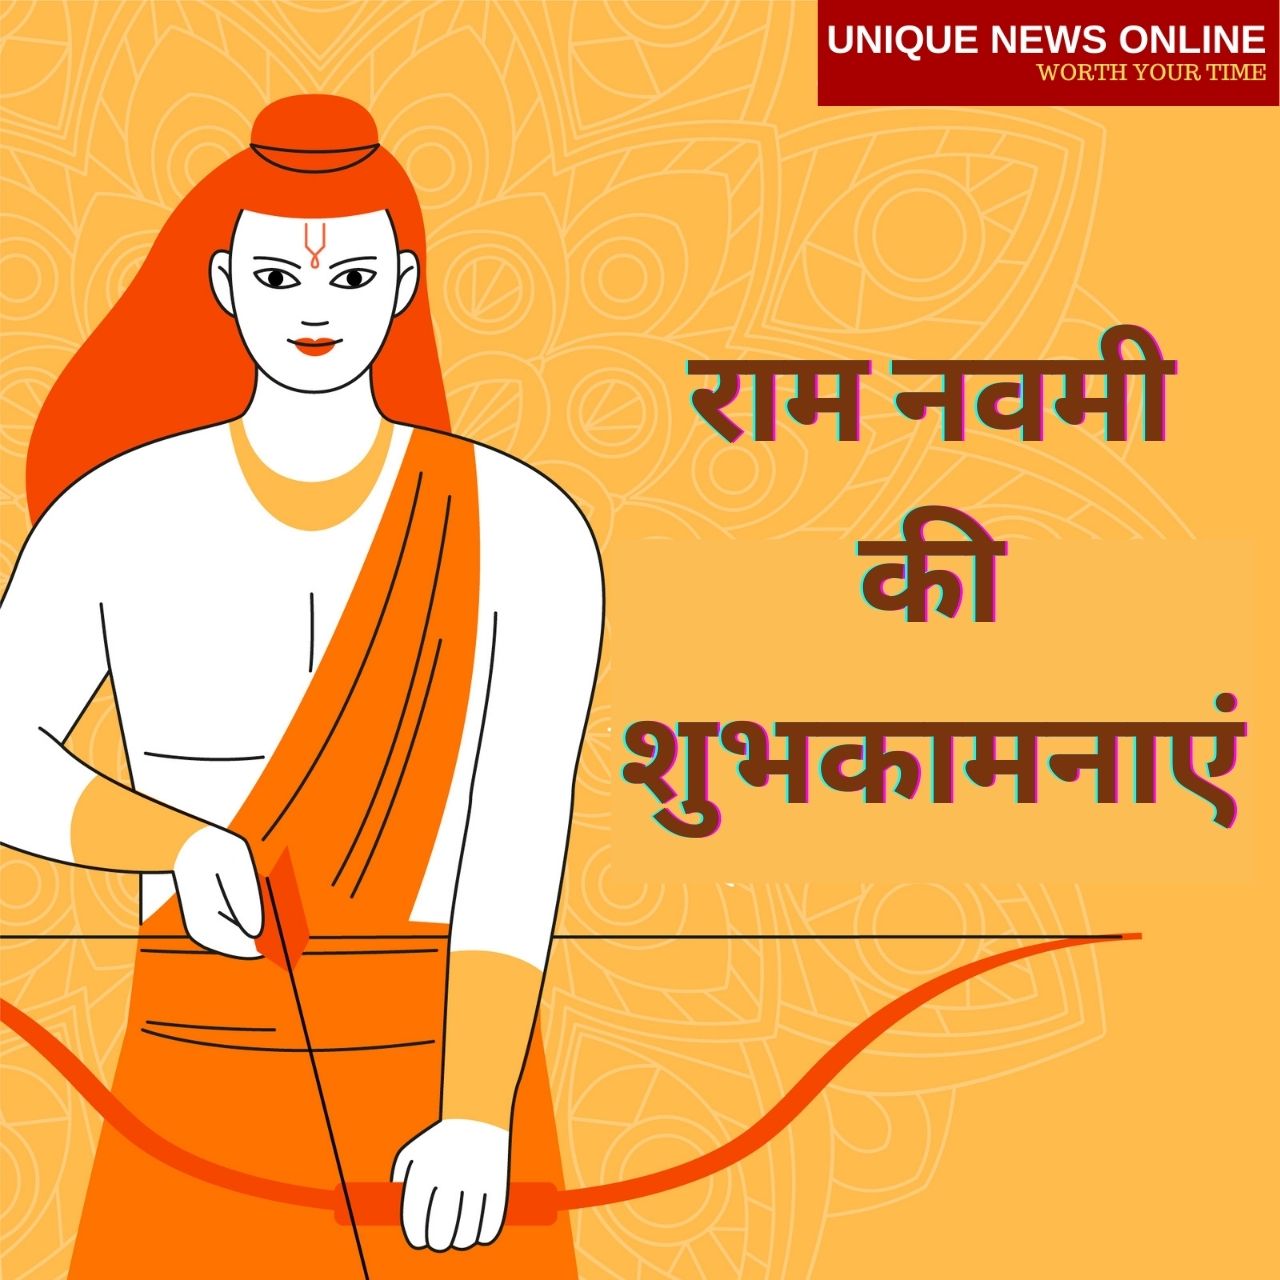 Happy Ram Navami 2021 wishes in Hindi, Messages, Quotes, Images, and Greetings to Share